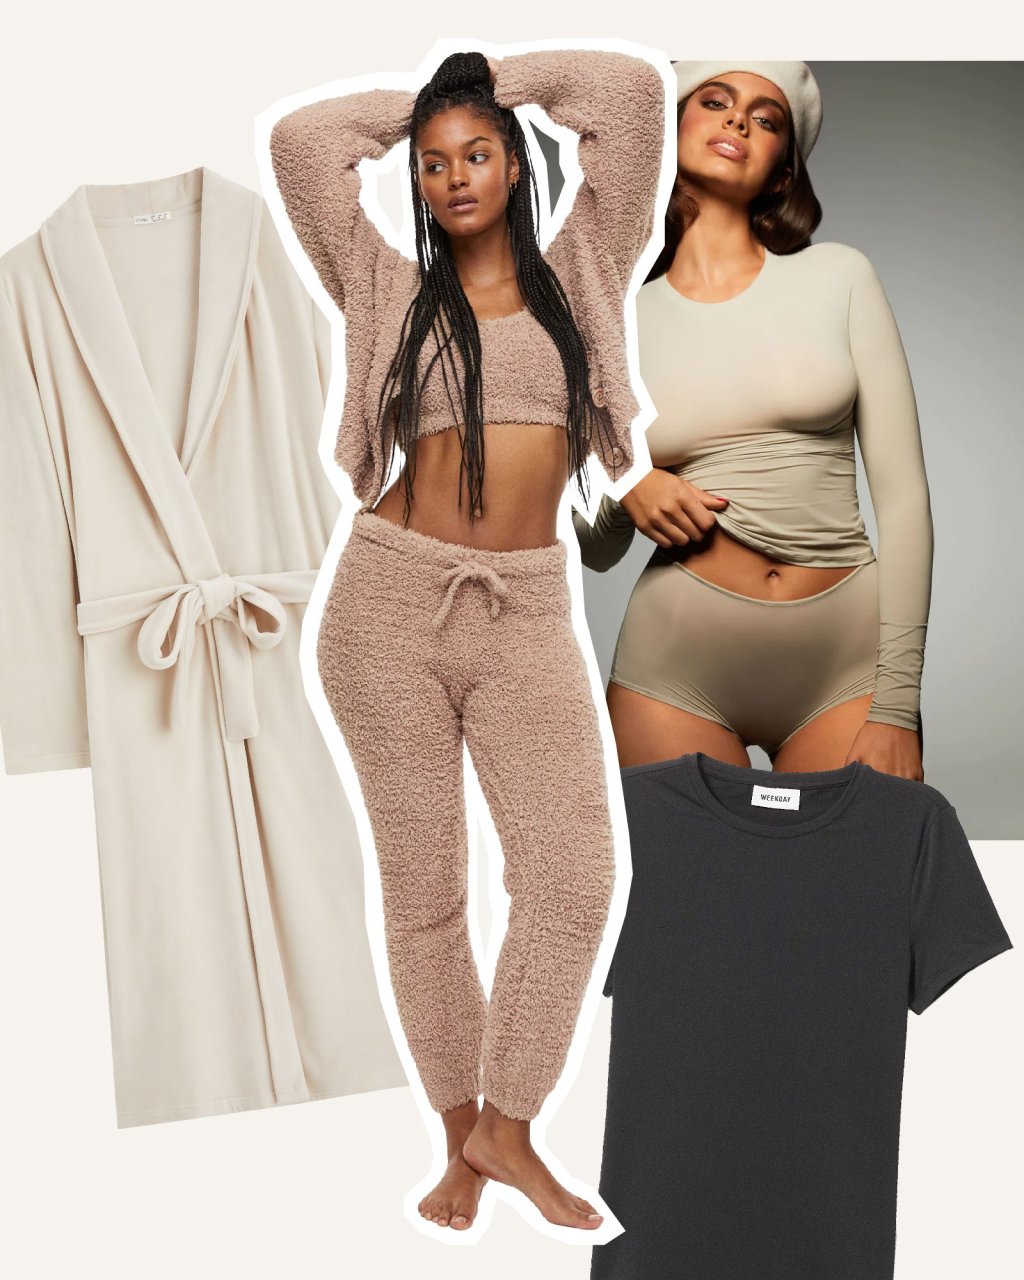 Where To Buy Dupes For Skims Robes, Pyjamas and Loungewear